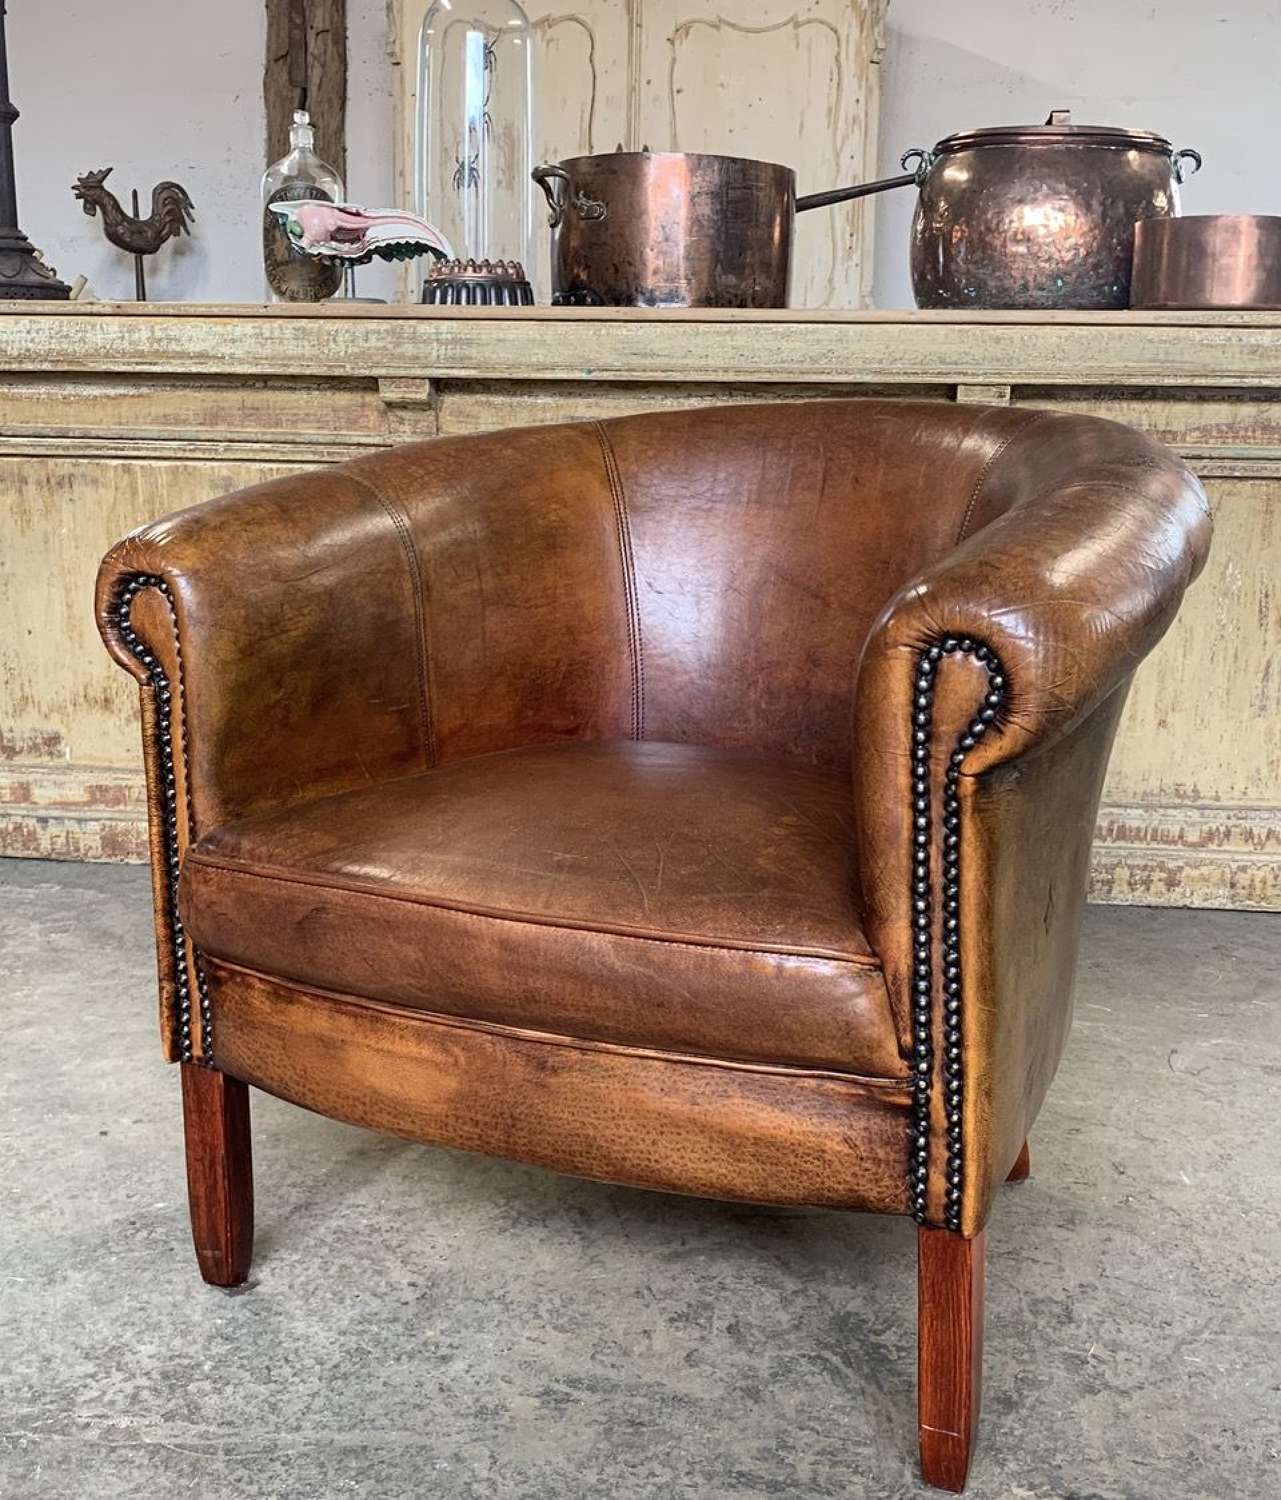 SMALL LEATHER TUB CHAIR